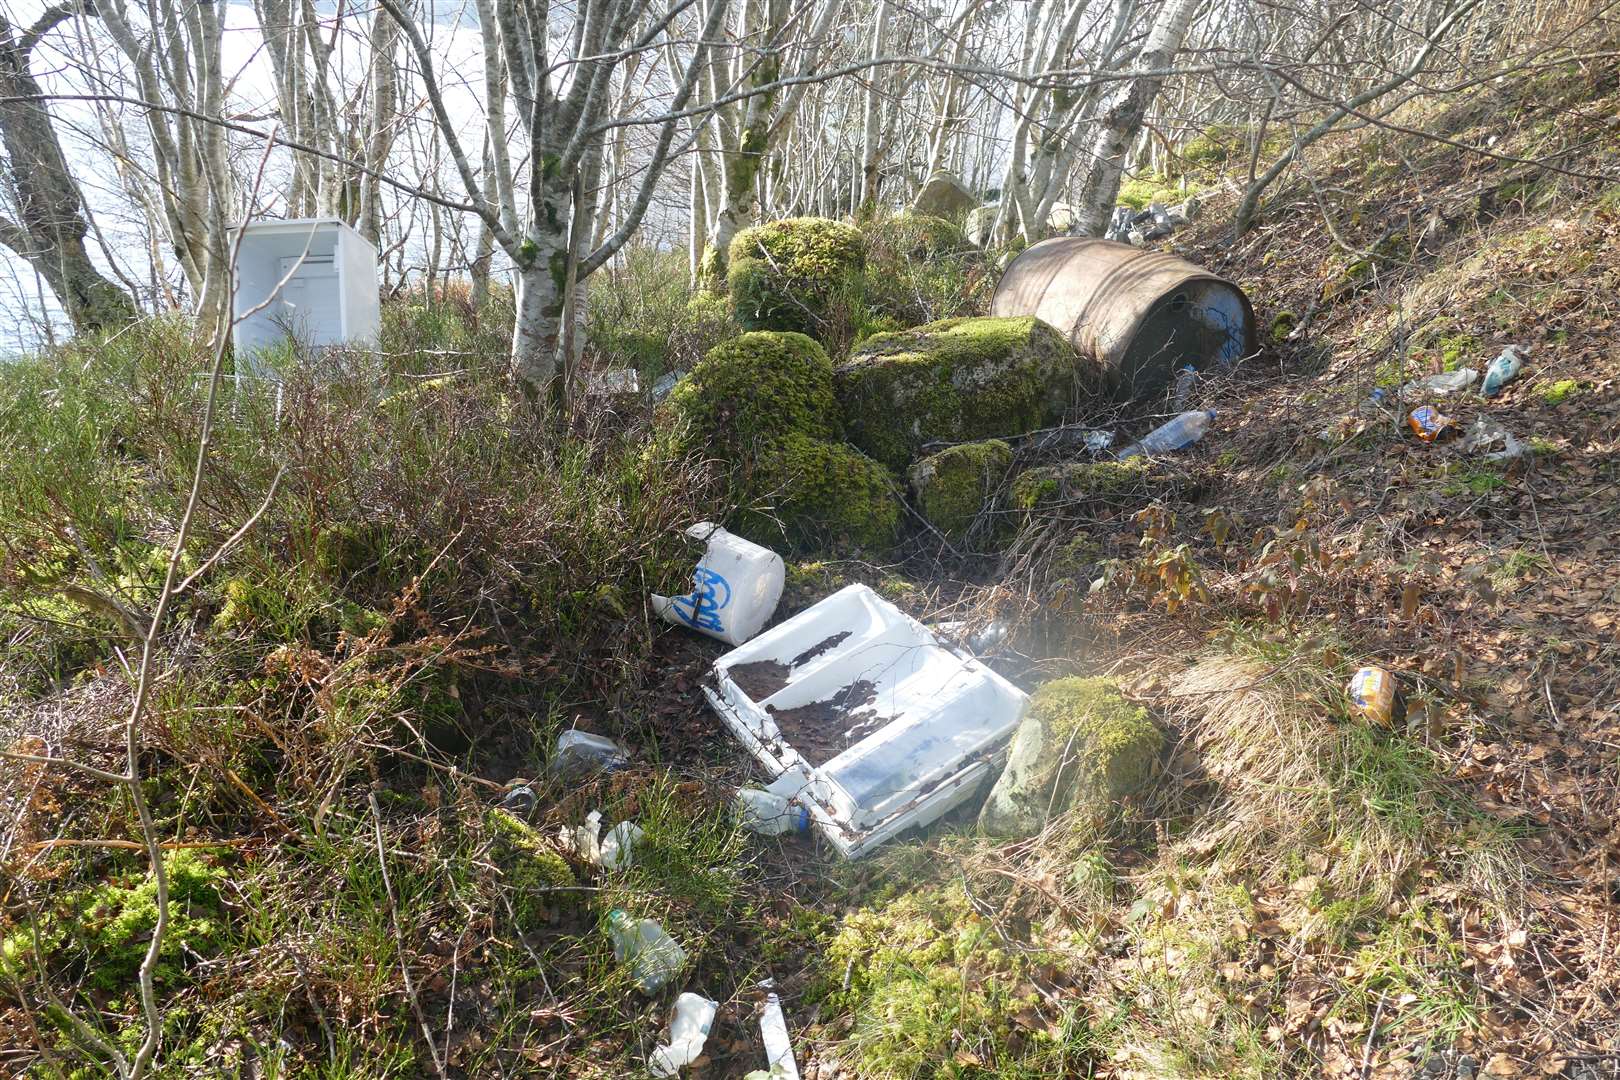 Litter which was dumped near to Laggan.